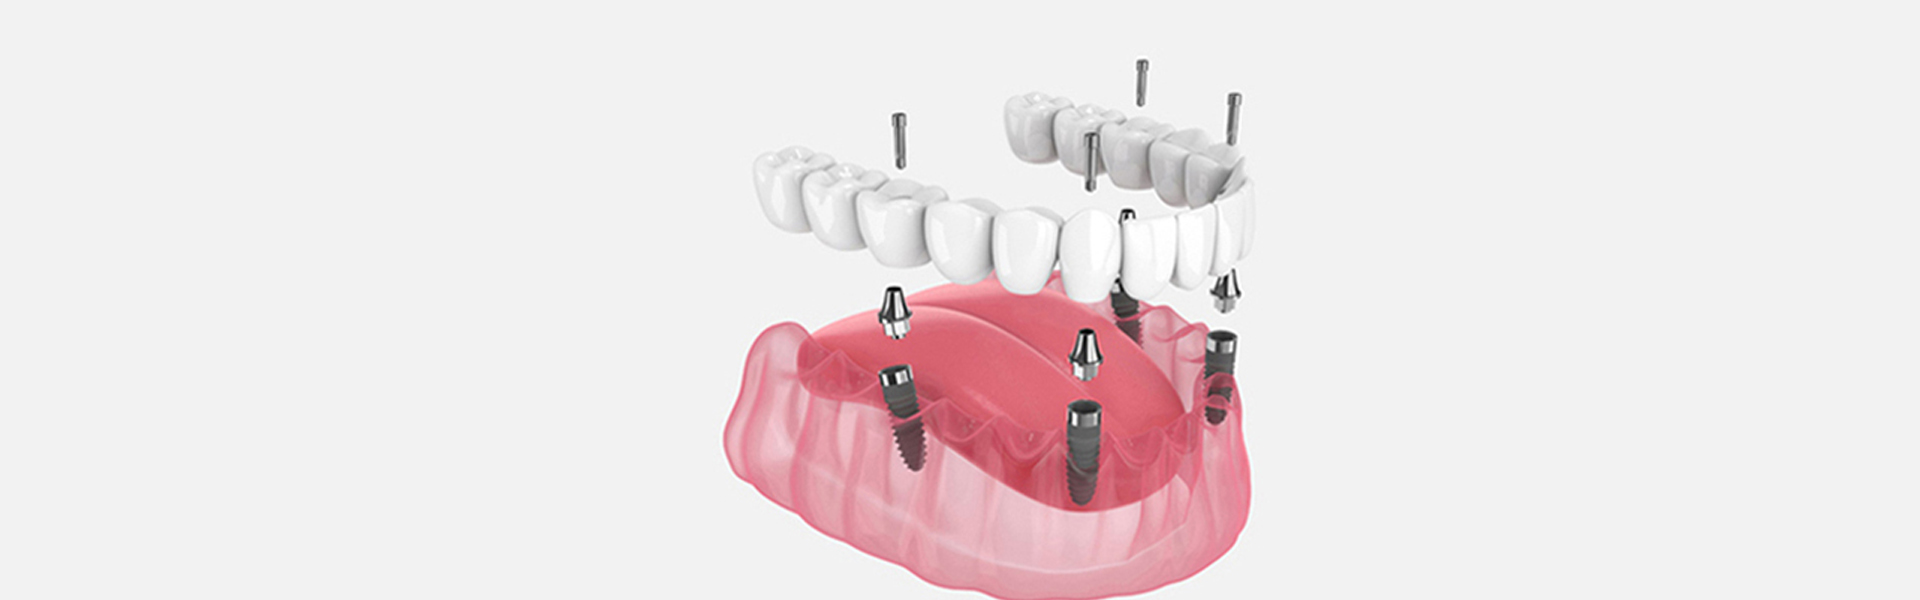 Debunking Six Common Myths About Dental Implants